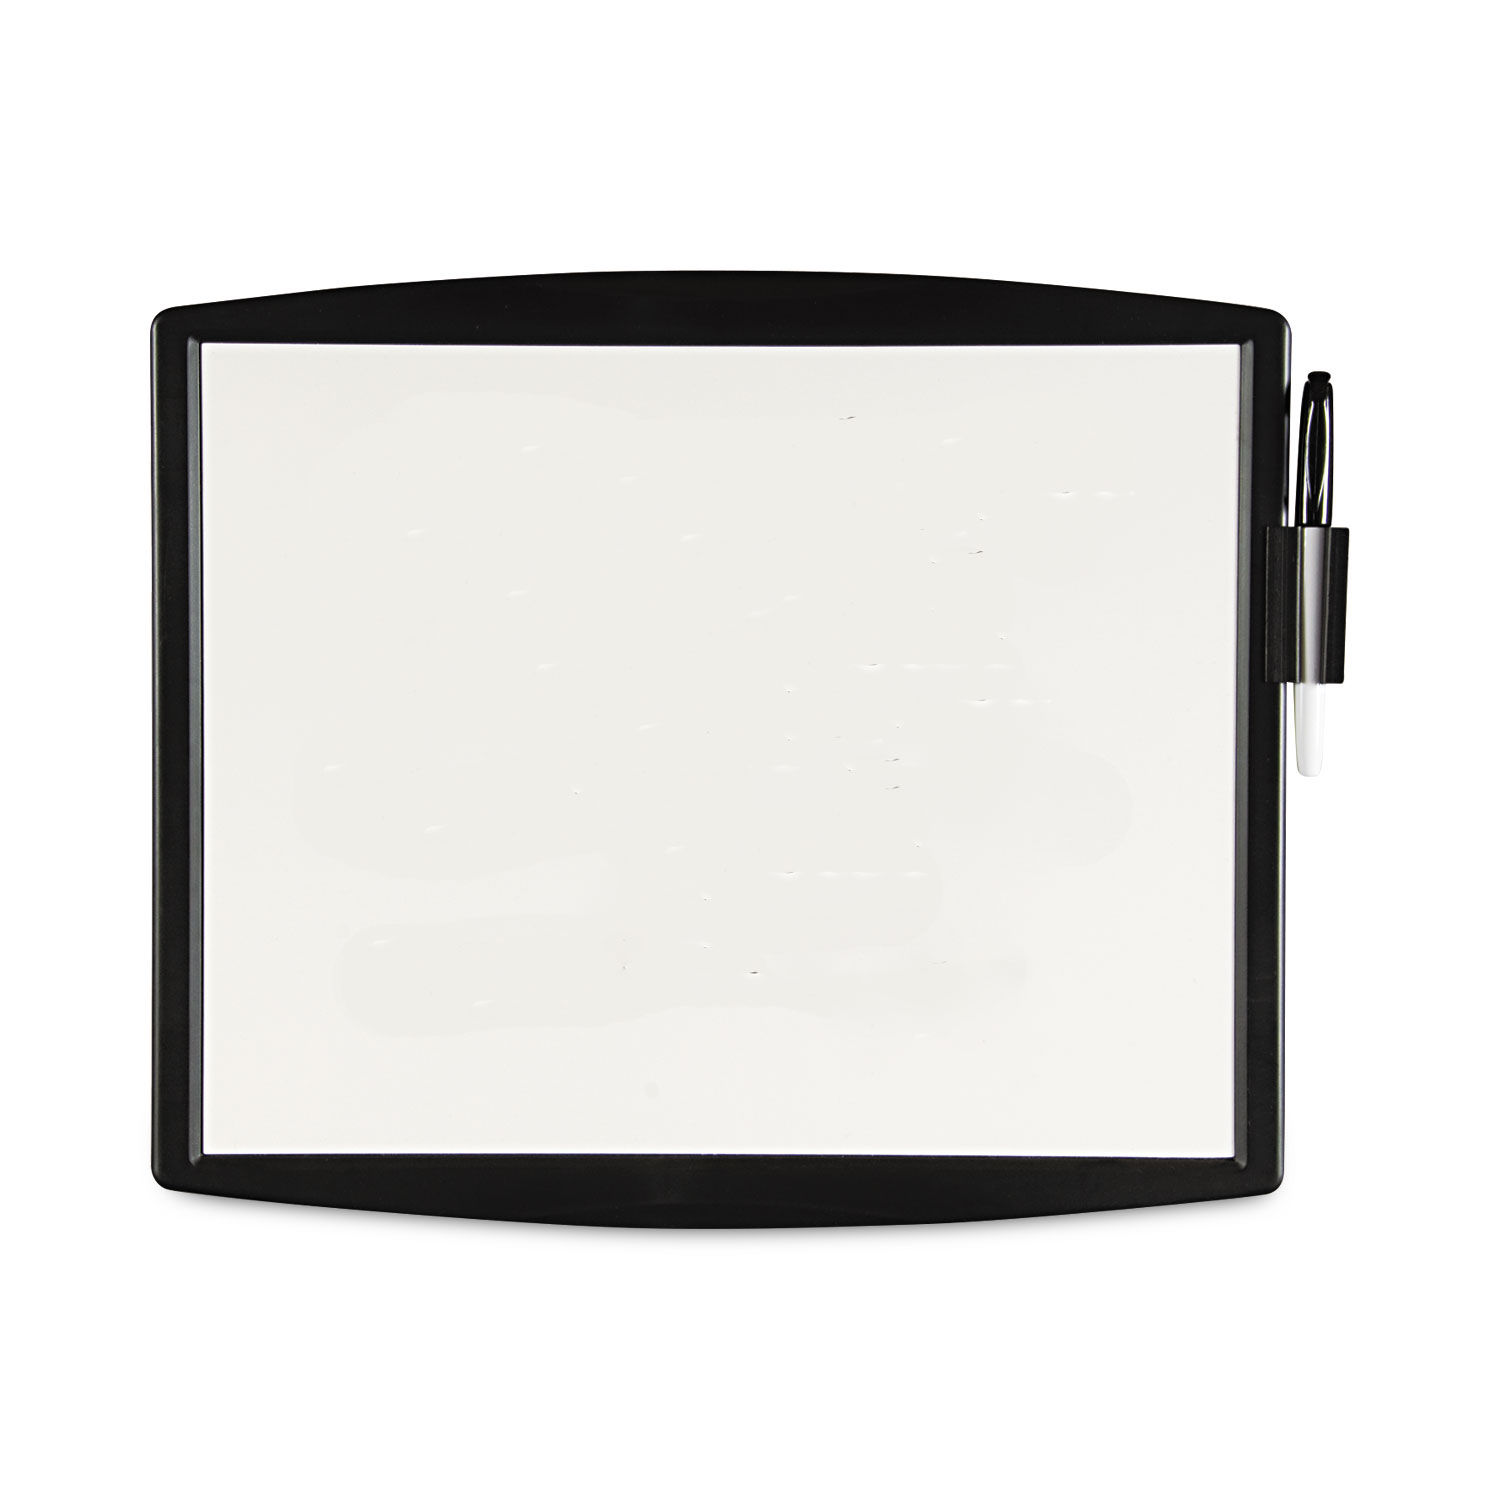 Partition Additions Dry Erase Board 15.38 x 13.25, White Surface, Dark Graphite HPS Frame